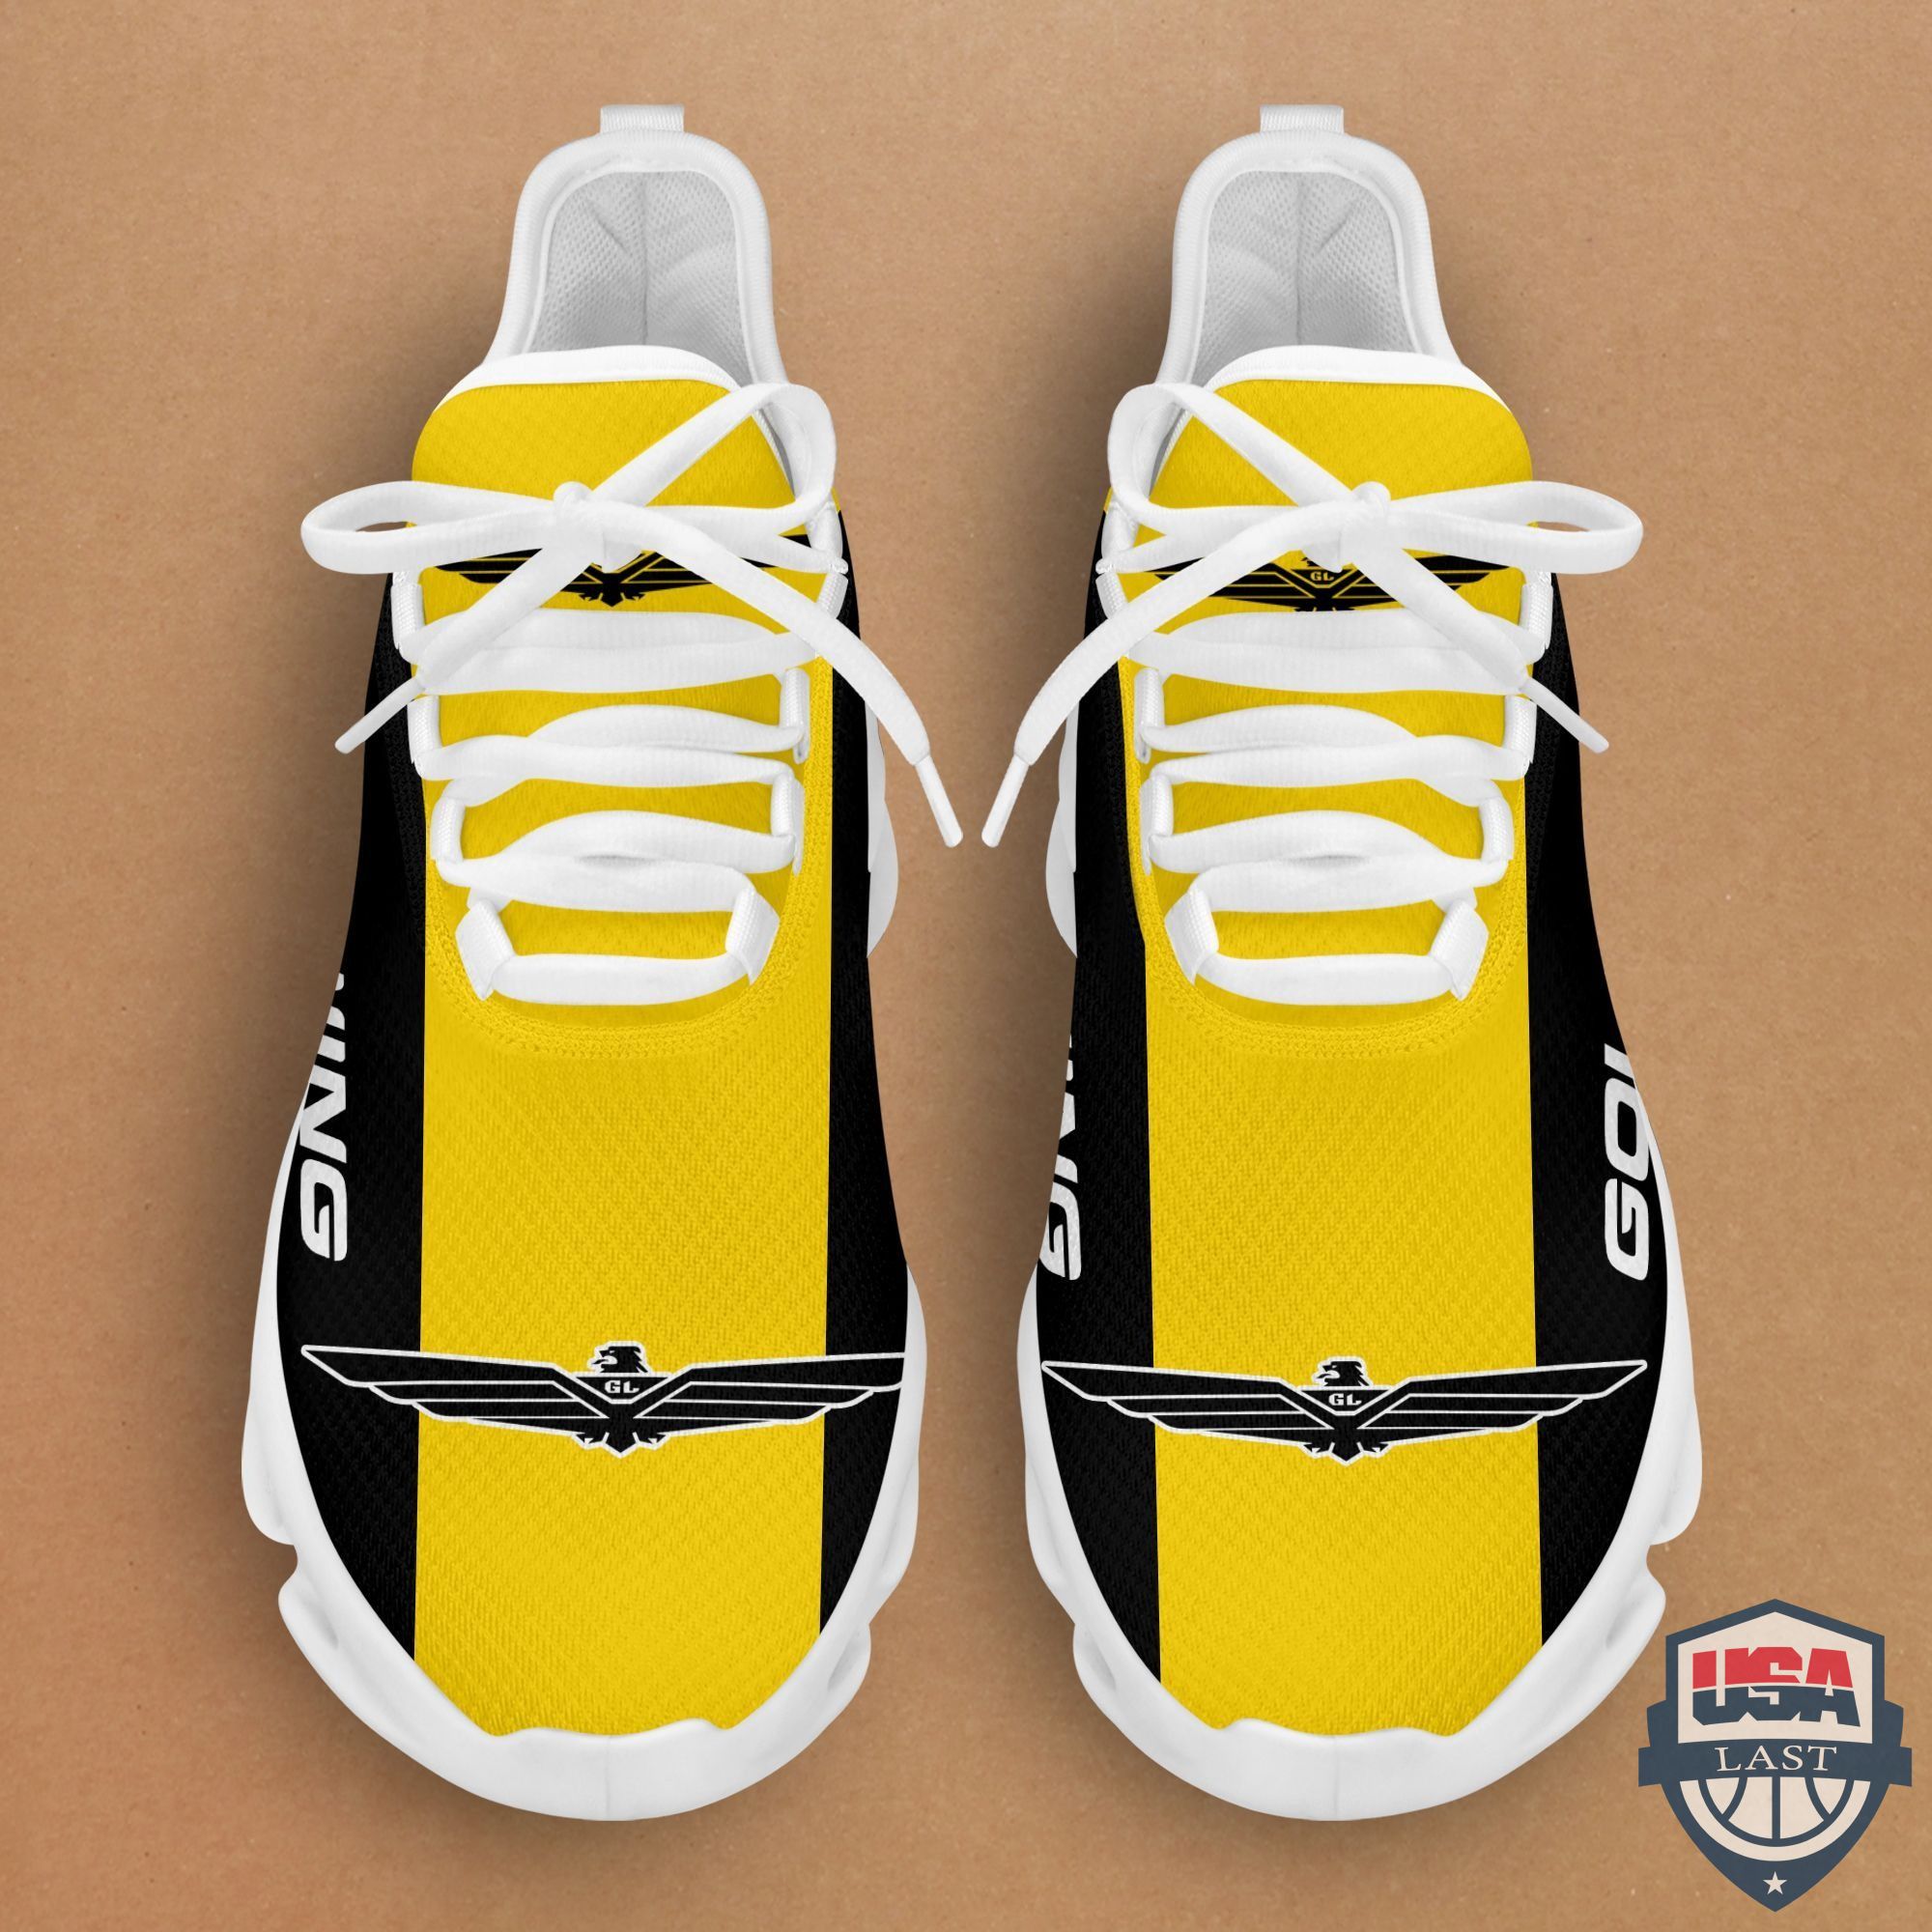 Top Trending – Honda Gold Wing Max Soul Shoes Yellow Version